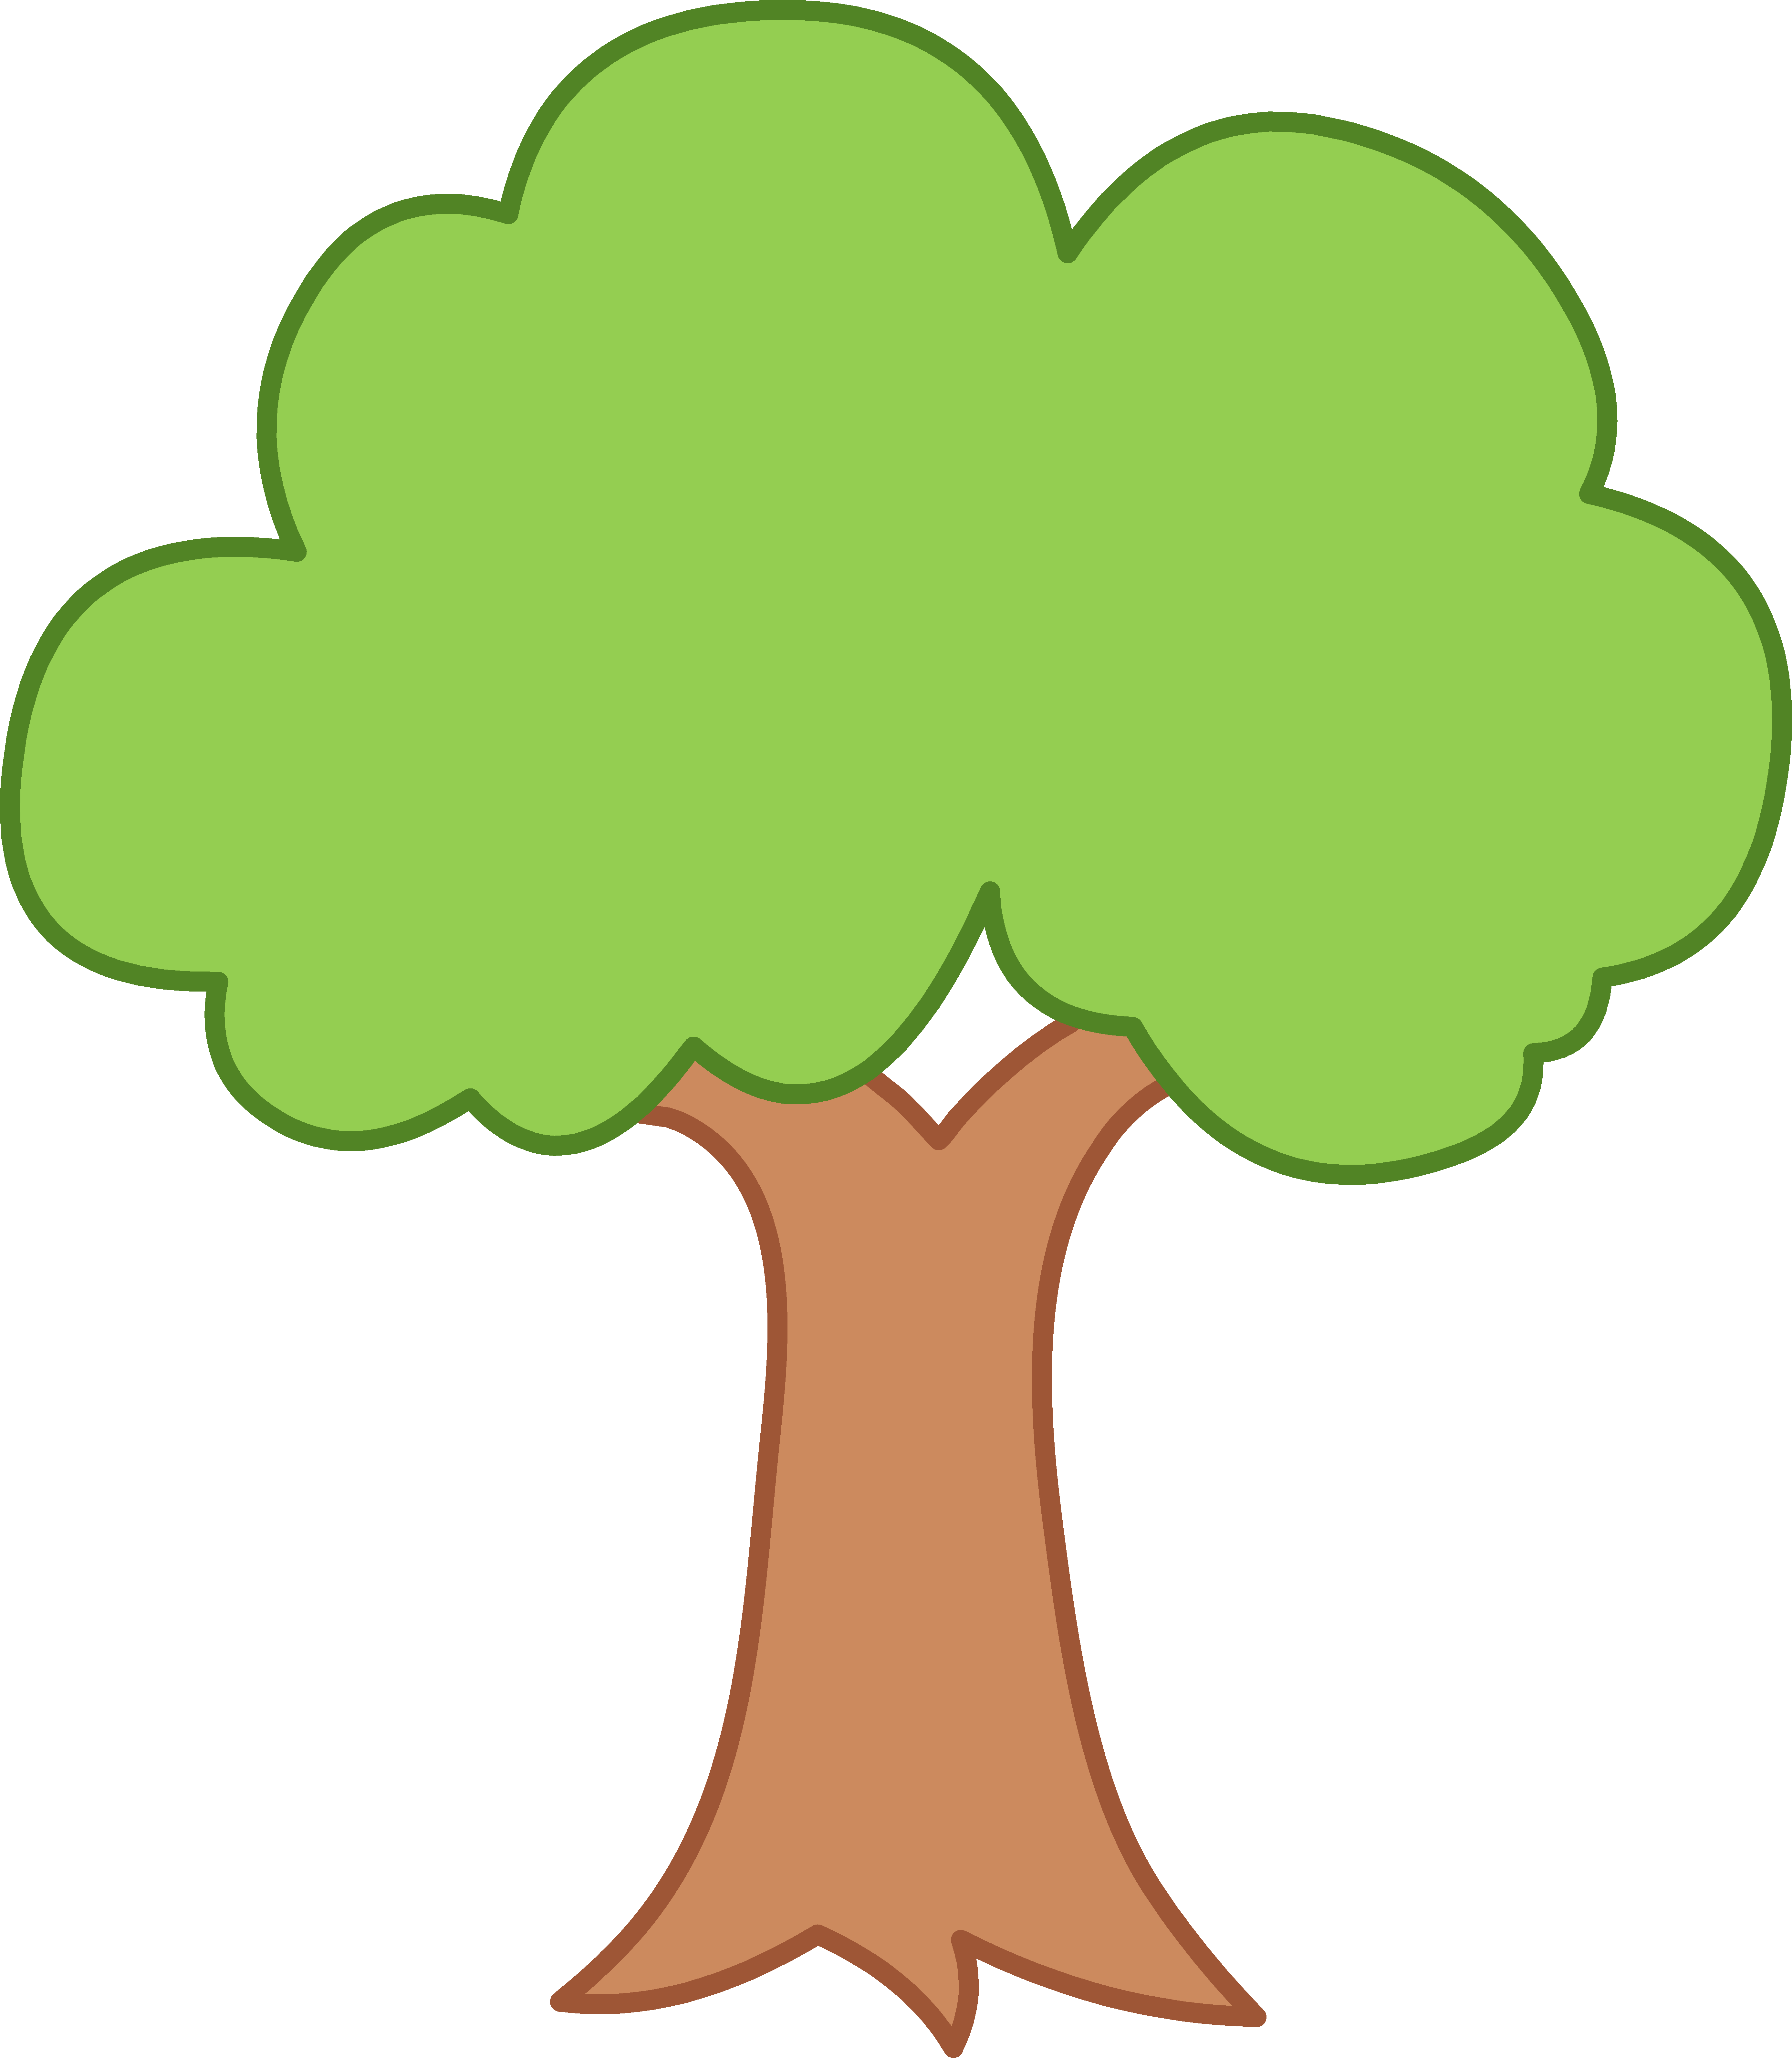 Tree Png - ClipArt Best